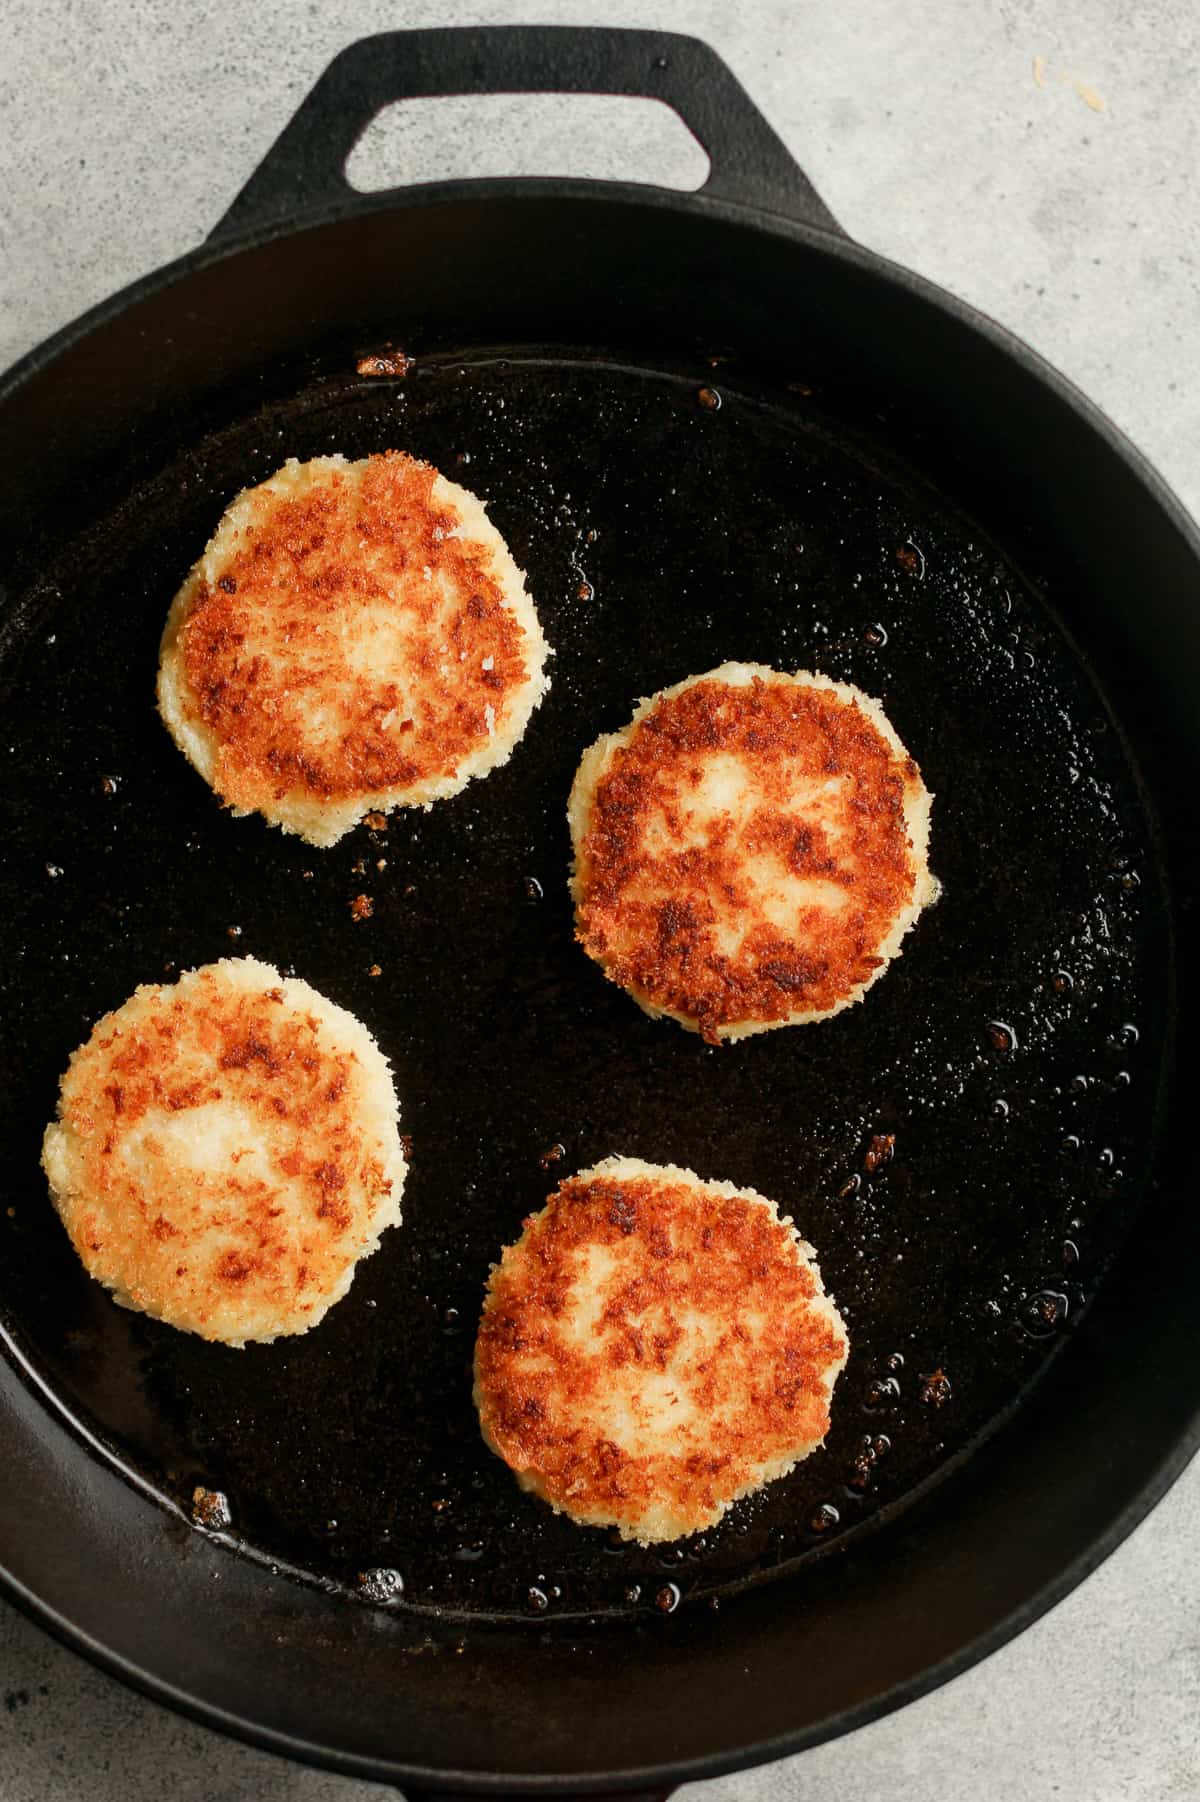 A cast iron skillet of potato cakes with cheese.